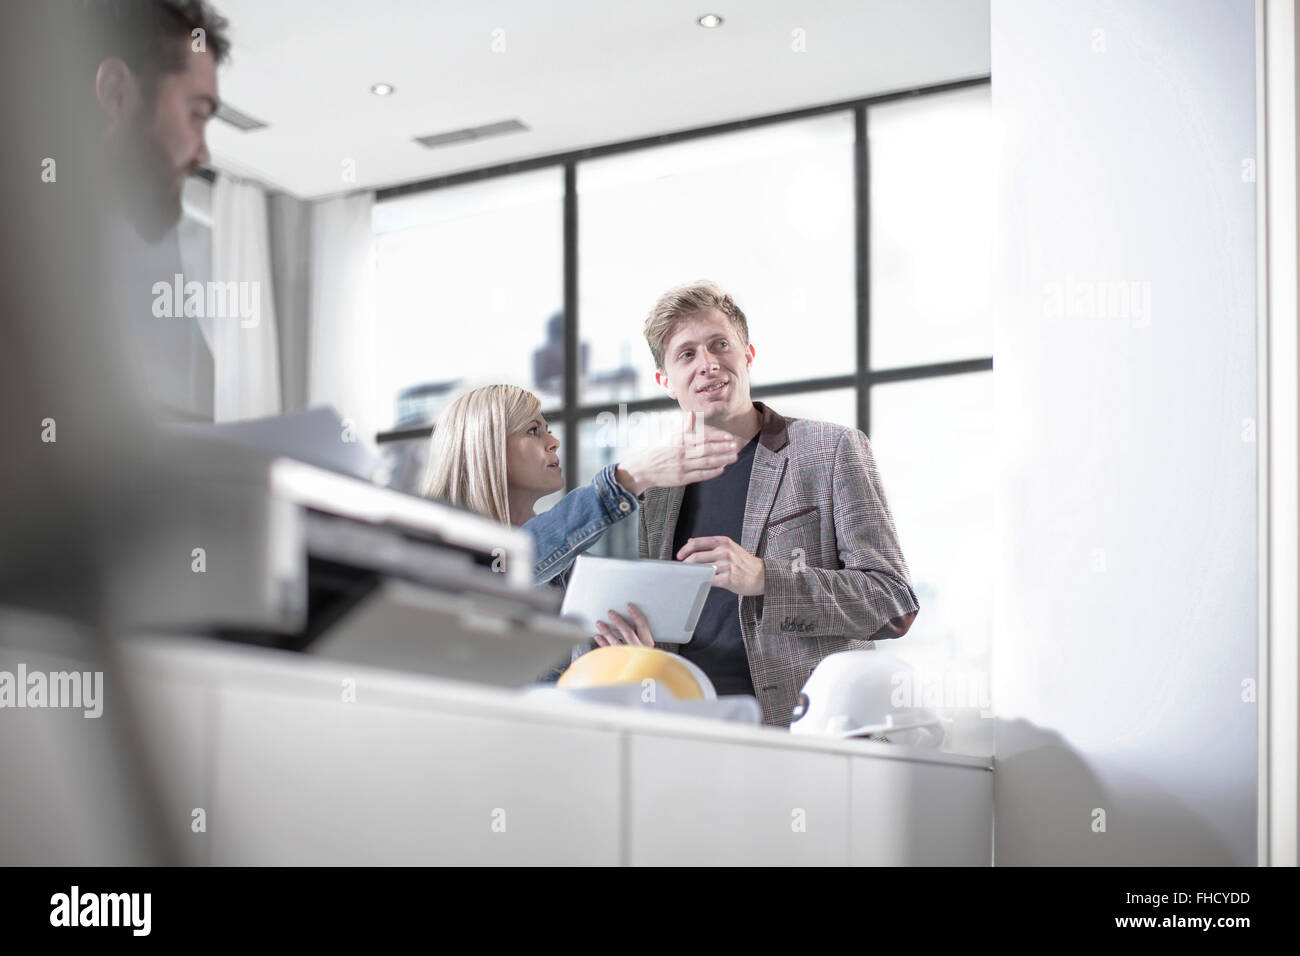 Woman talking to a man in office giving directions Stock Photo